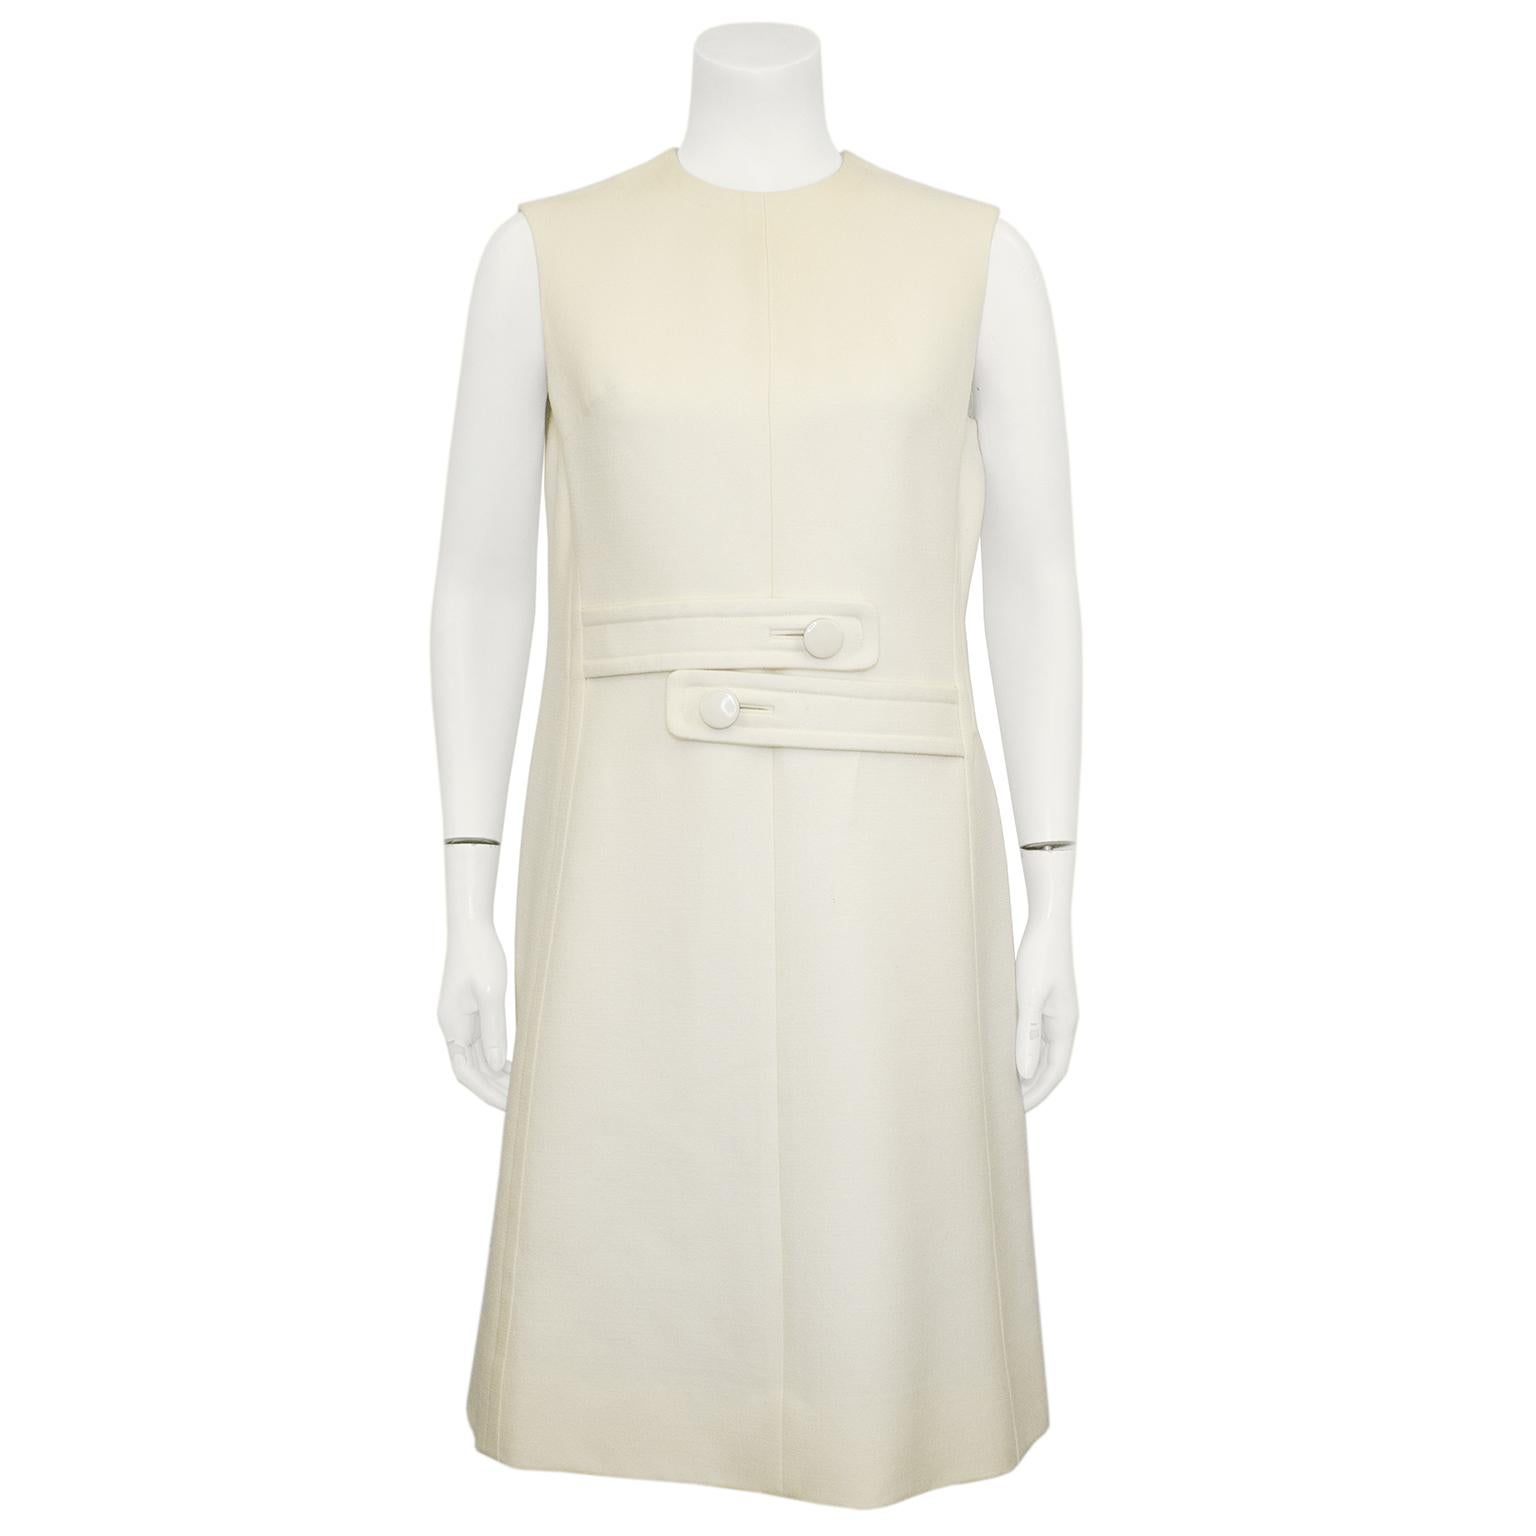 Very chic Sylvia Mills mod coat and dress ensemble from the 1960s. Double breasted coat with notched collar, slanted flap pockets and back centre seam inverted pleat vent. Dress is a classic sleeveless shift with lovely seaming details and invisible